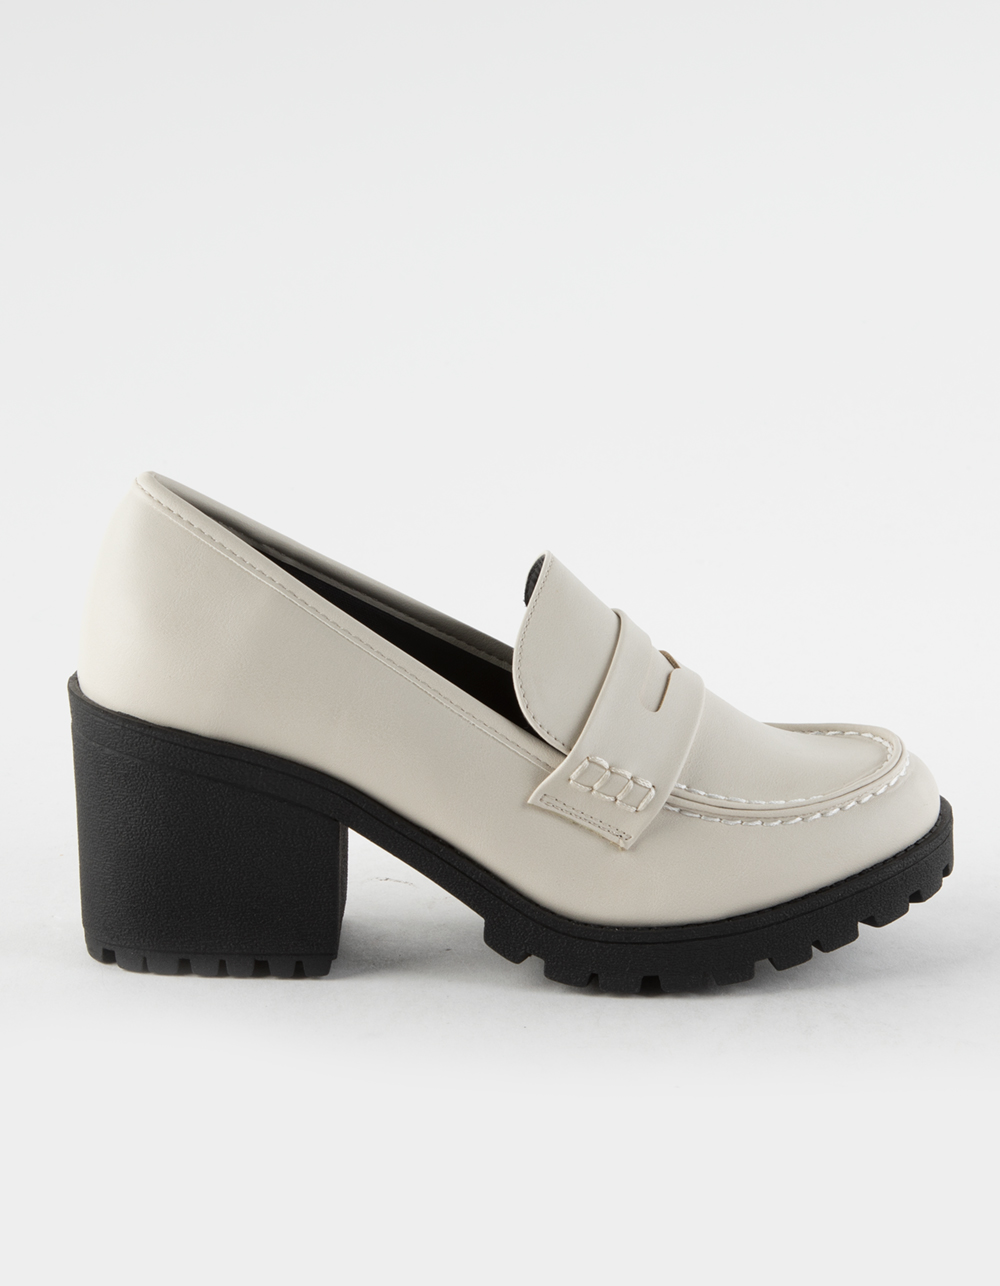 scheerapparaat Chirurgie Stad bloem SODA Kinder Platform Womens Penny Loafer Shoes - WHITE | Tillys